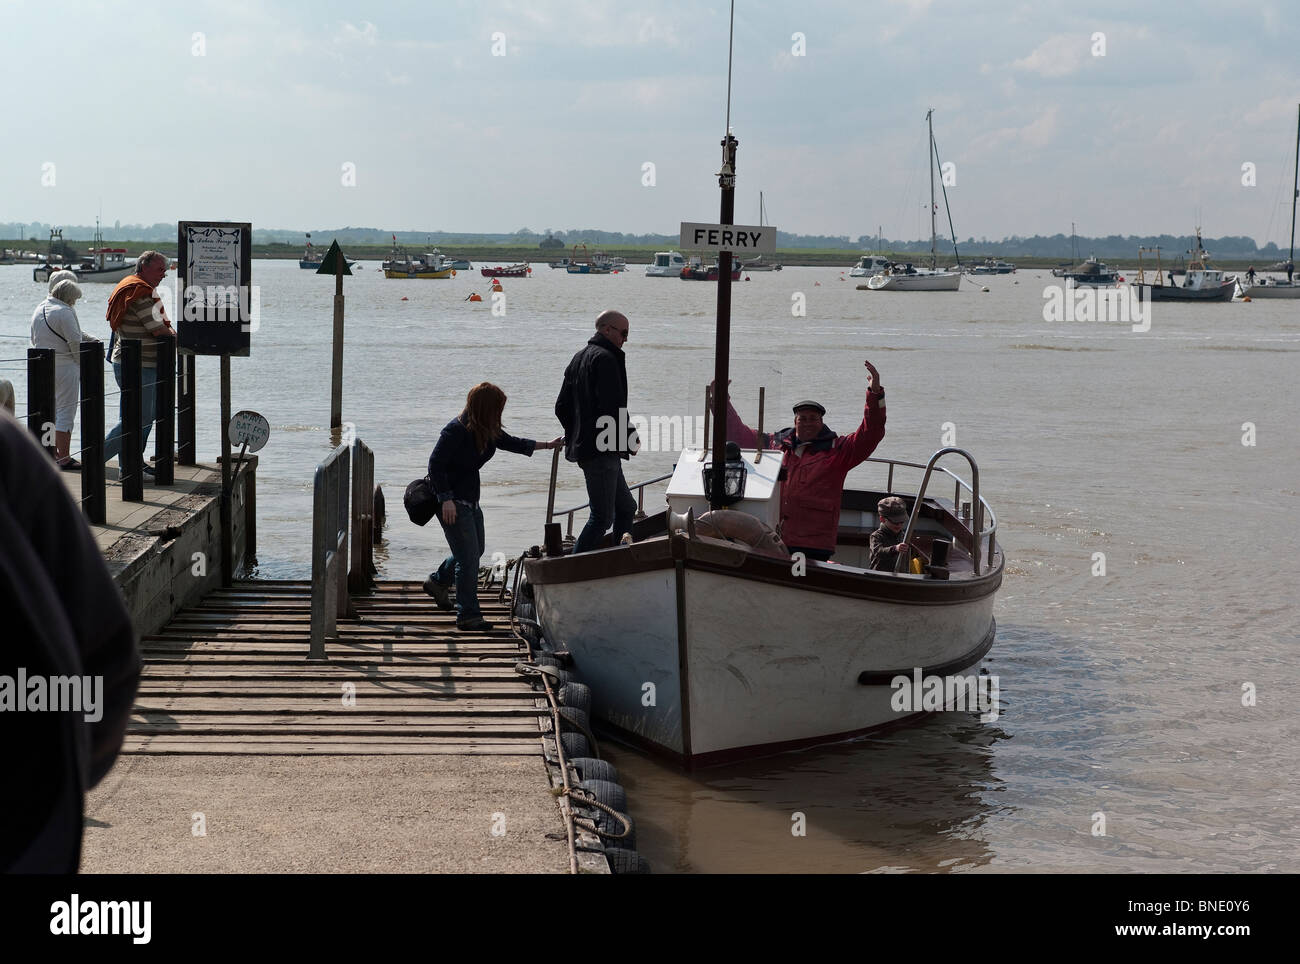 Bawdsey Ferry loading with passengers crossing to Feiixstowe in Suffolk UK Stock Photo